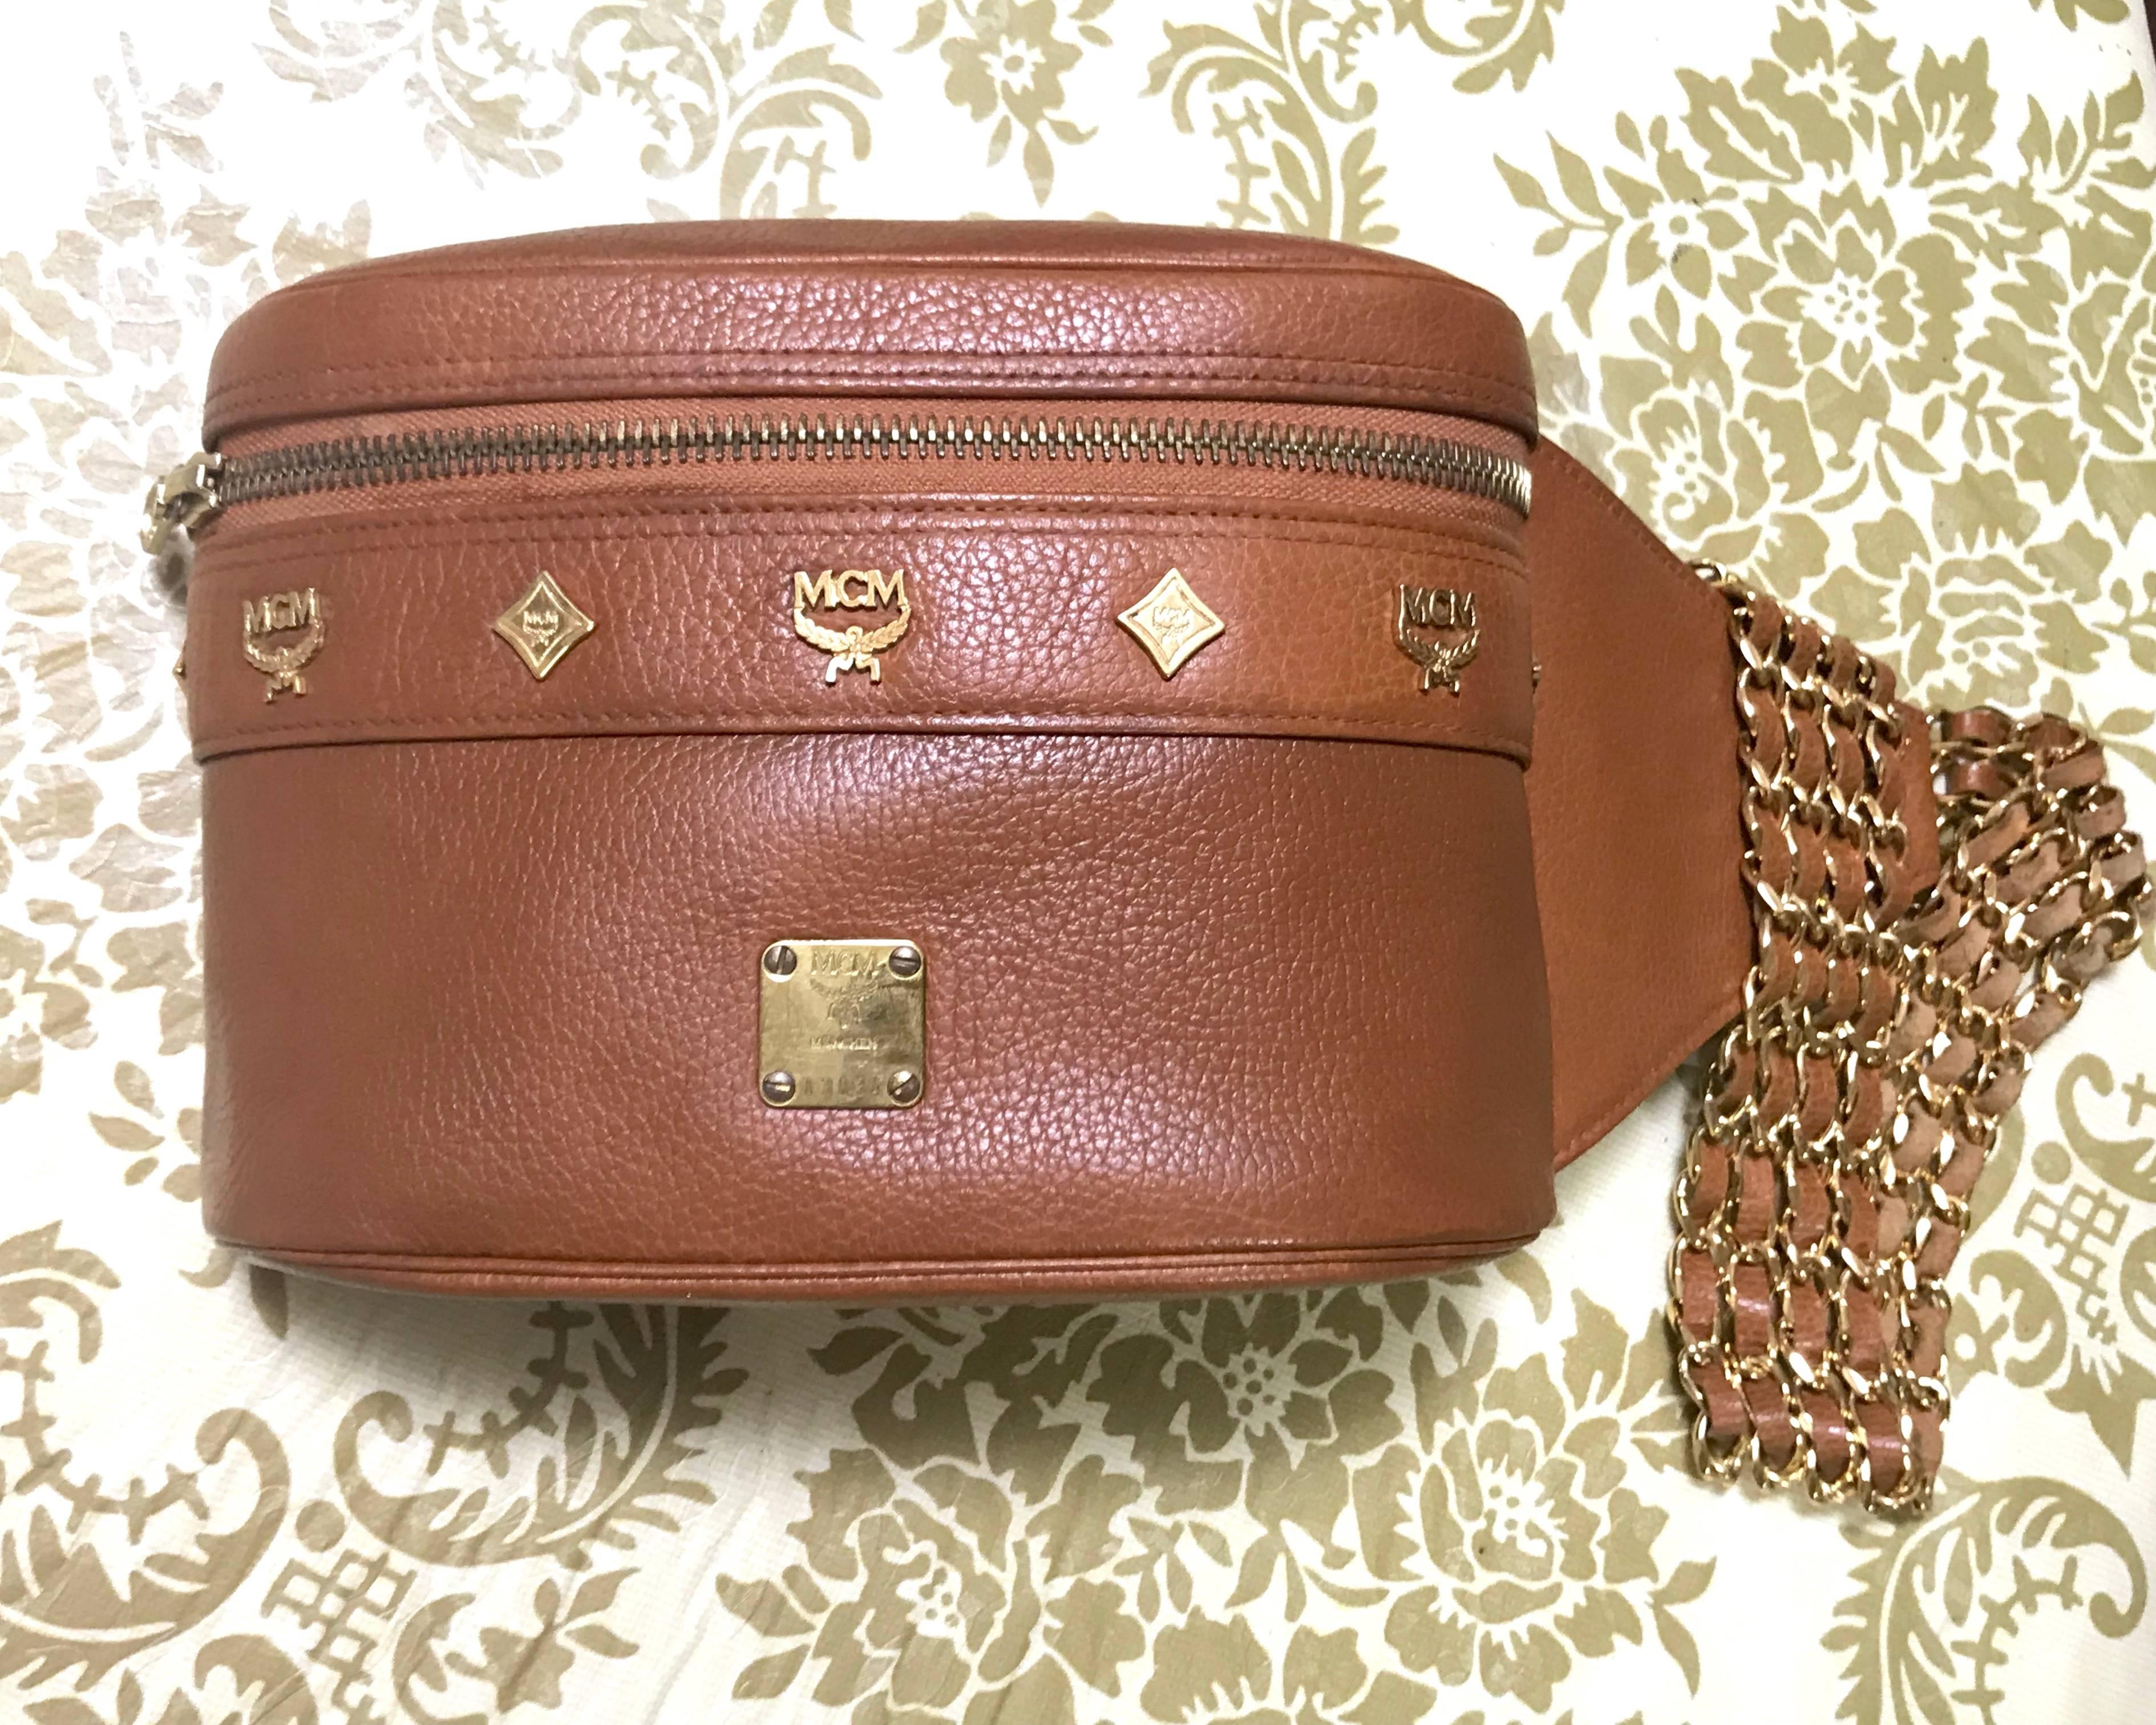 1990s. Vintage MCM brown leather fanny pack with multiple layer golden chain and leather belt with logo studded motifs. Rare masterpiece. Unisex


Introducing another rare masterpiece from MCM back in the late 80's through early 90's.
Rare brown